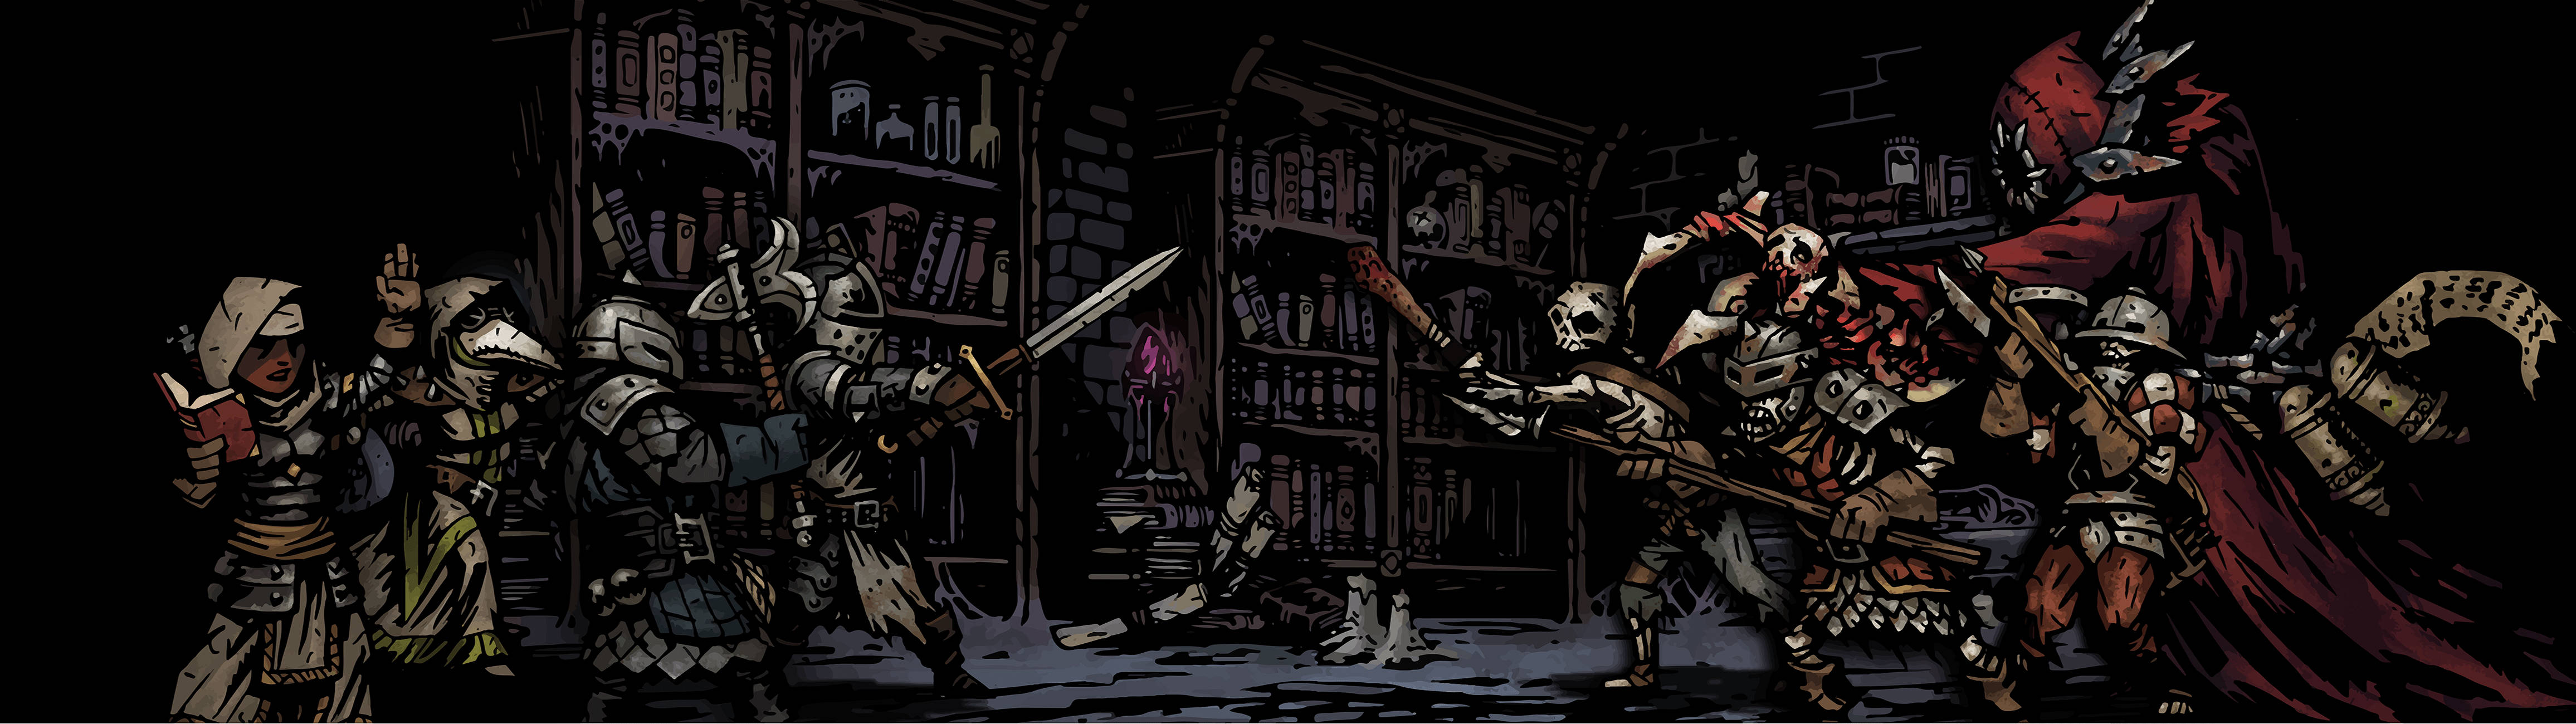 "Experience the Darkest Dungeon with a Dual Monitor Set Up" Wallpaper